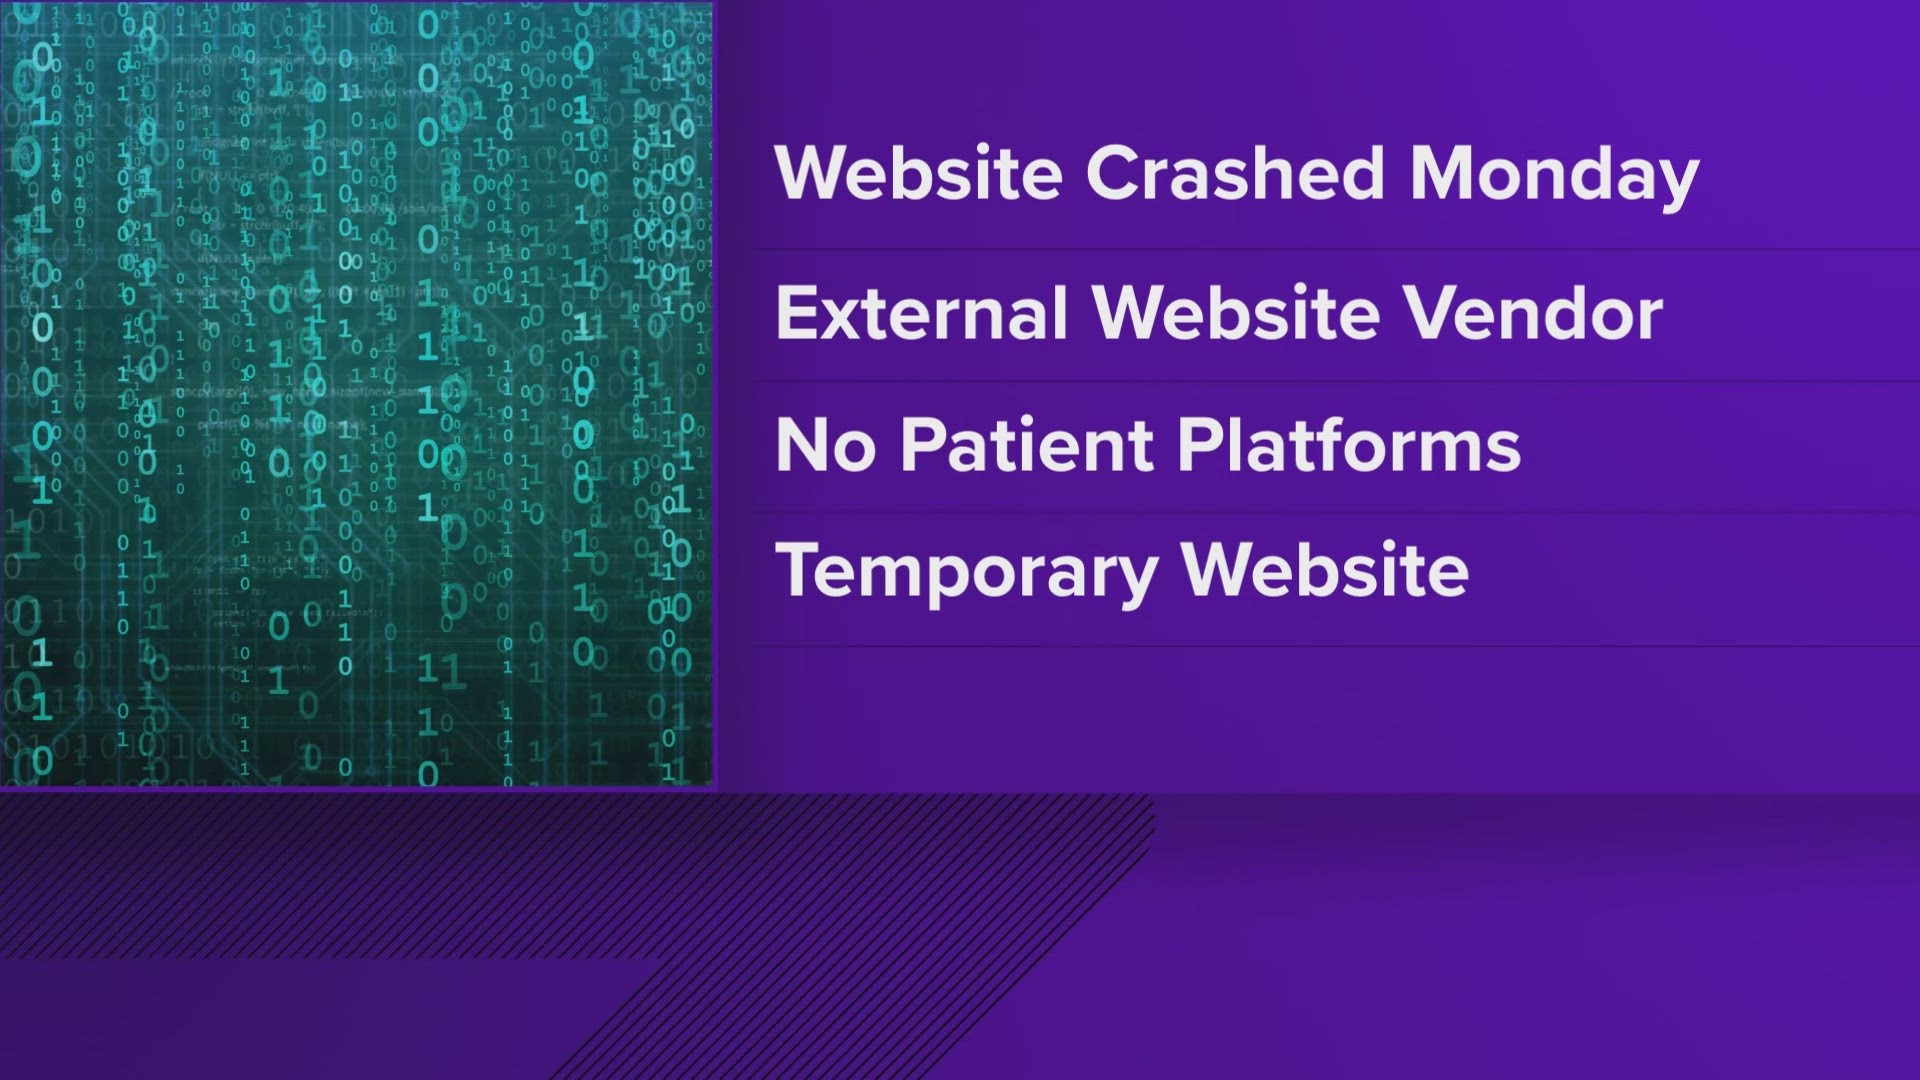 The hospital system said the cyberattack was on the external website vendor.